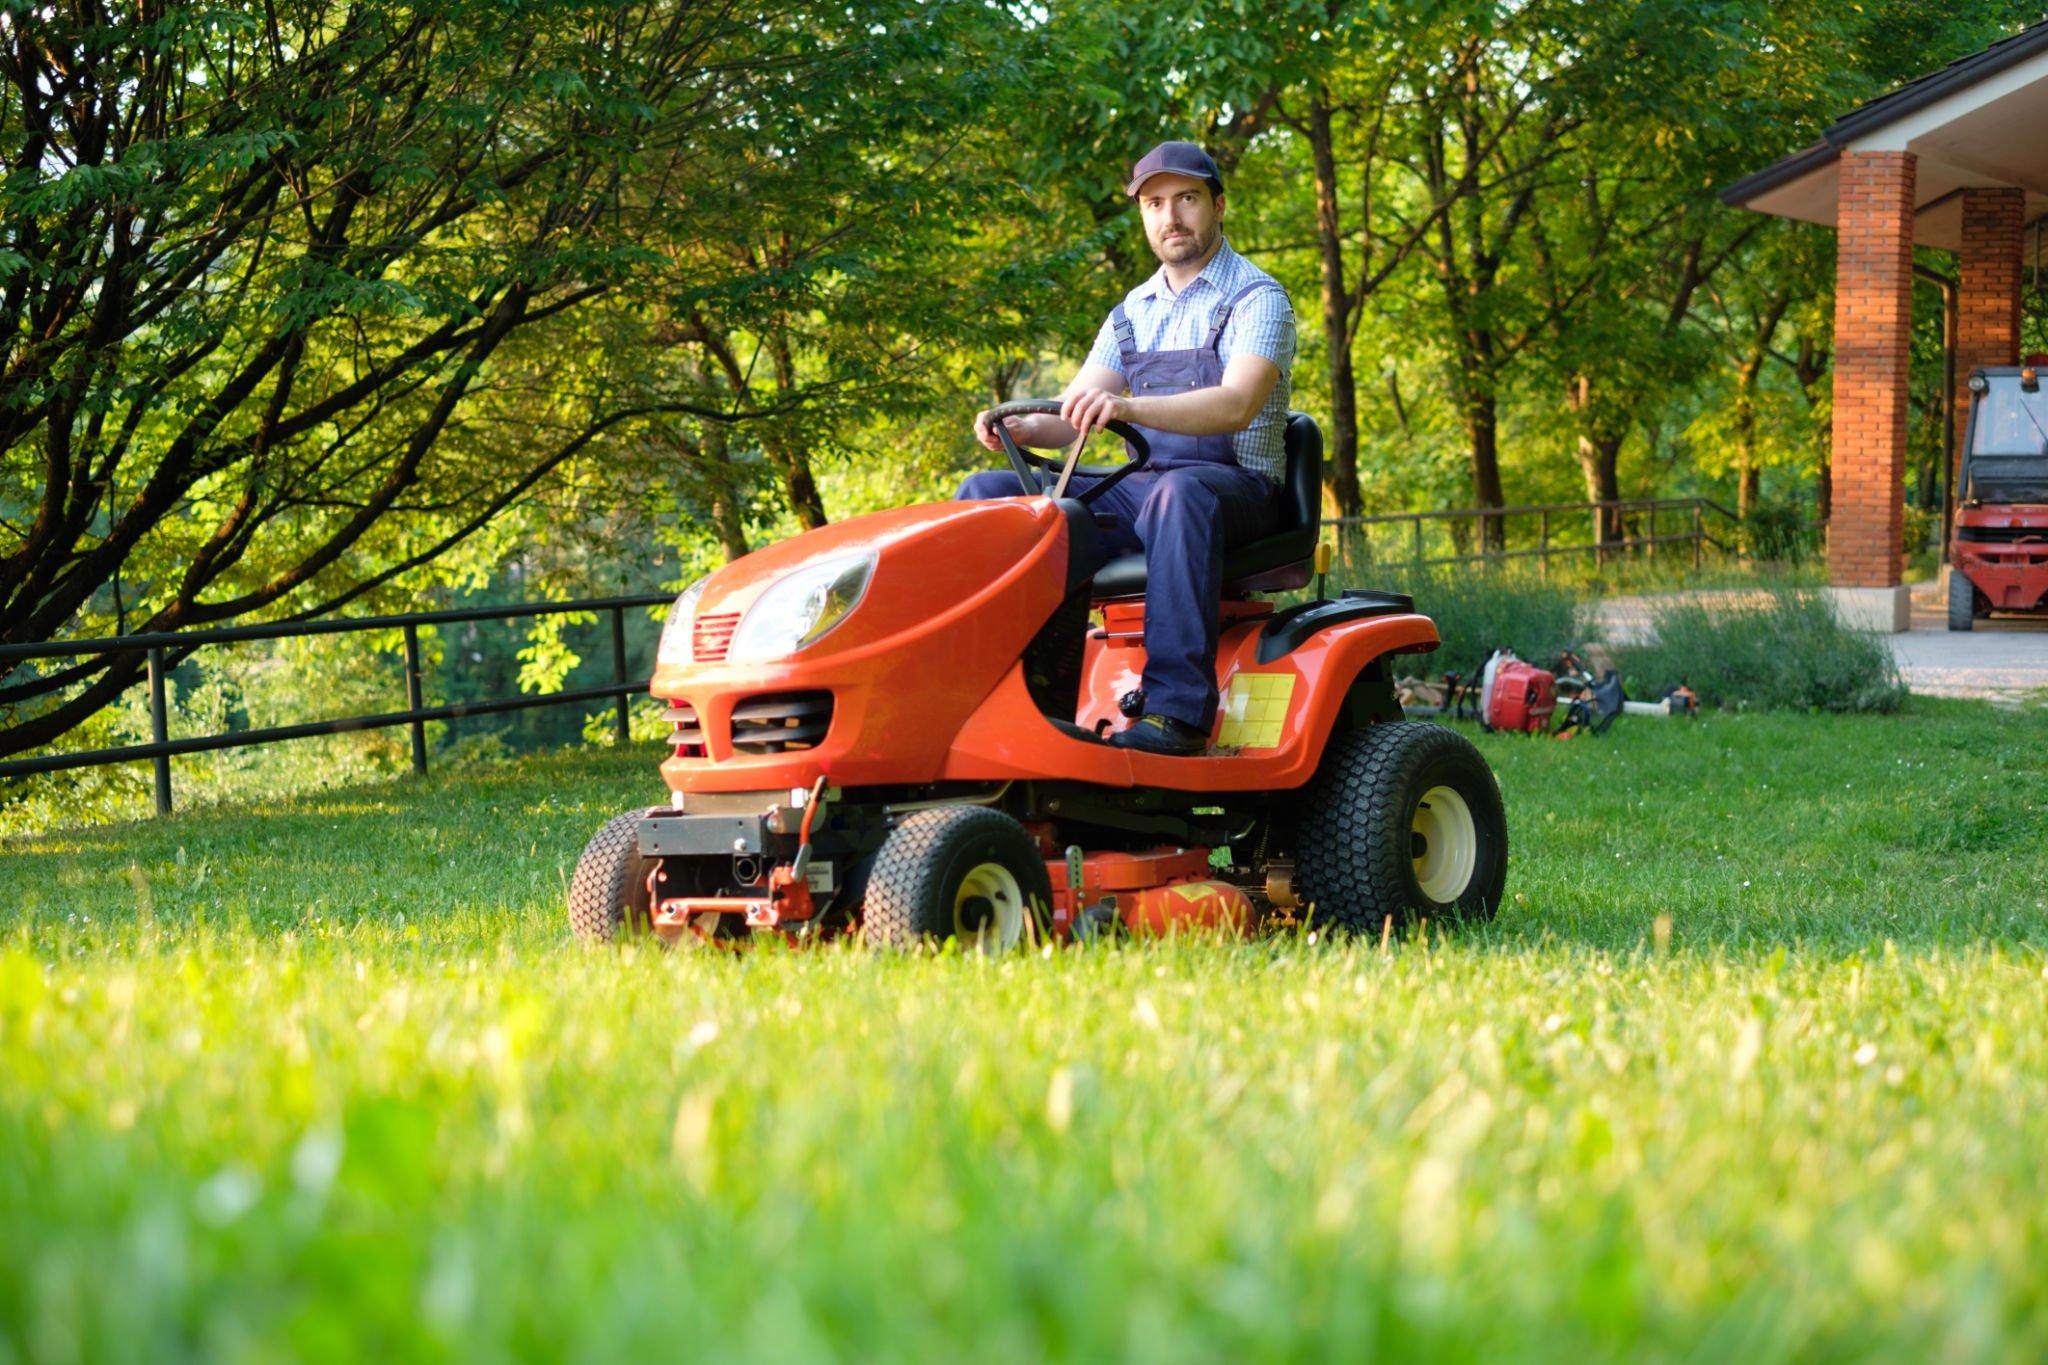 Tips to Look for While Hiring Lawn Care Company